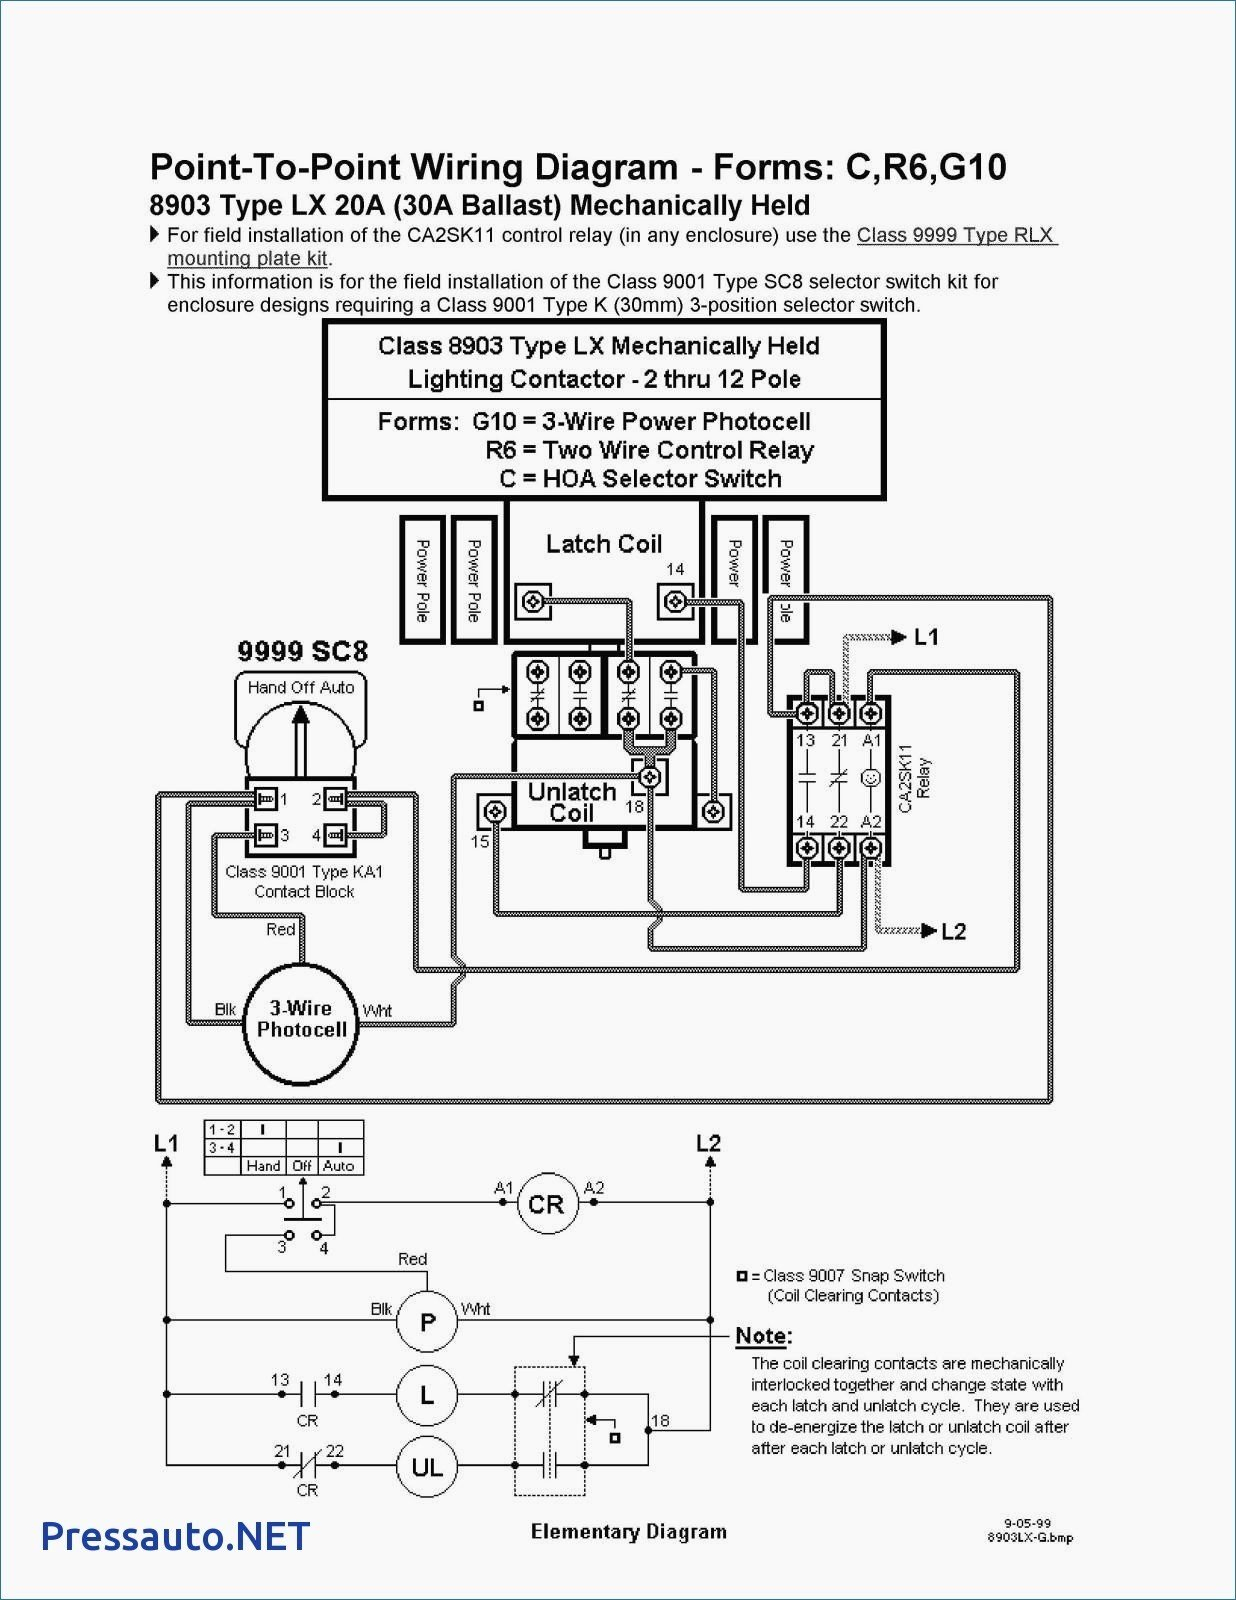 Contactor And Photocell Wiring Diagram Pdf - Wiring Diagrams Click - Photocell Wiring Diagram Pdf